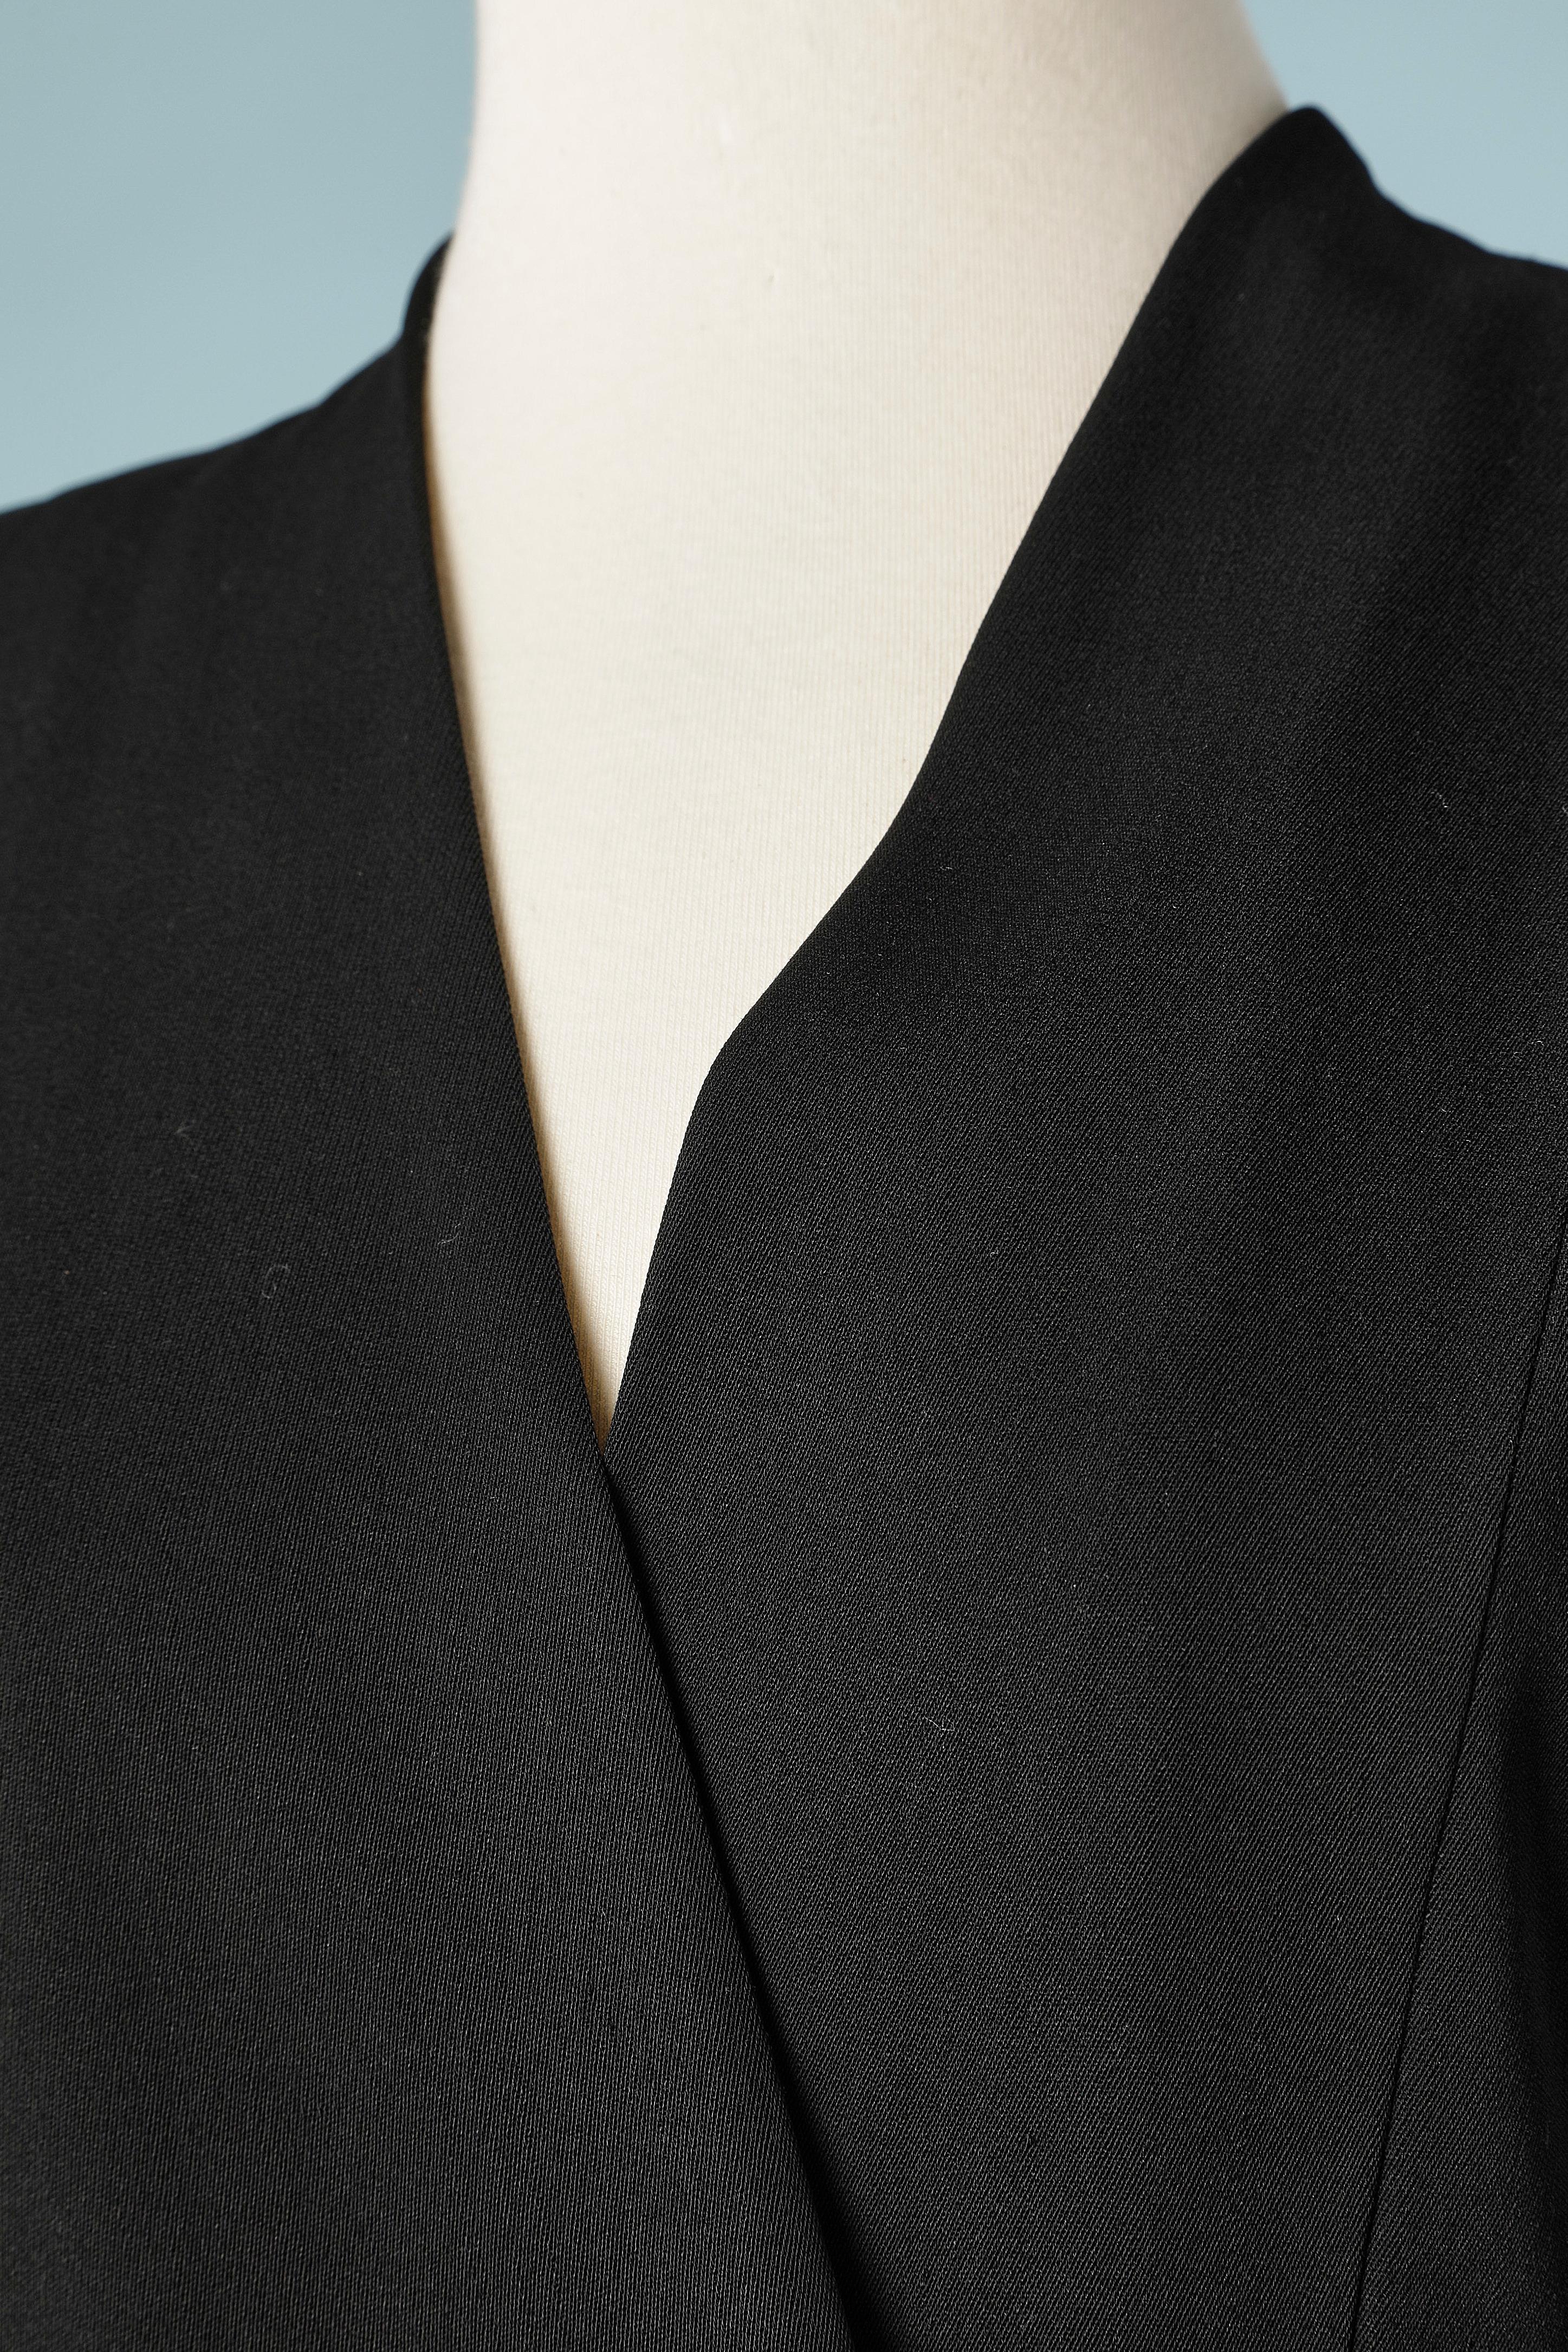 Black evening coat with over-sleeves ( like a cape) in passementerie. Main fabric 